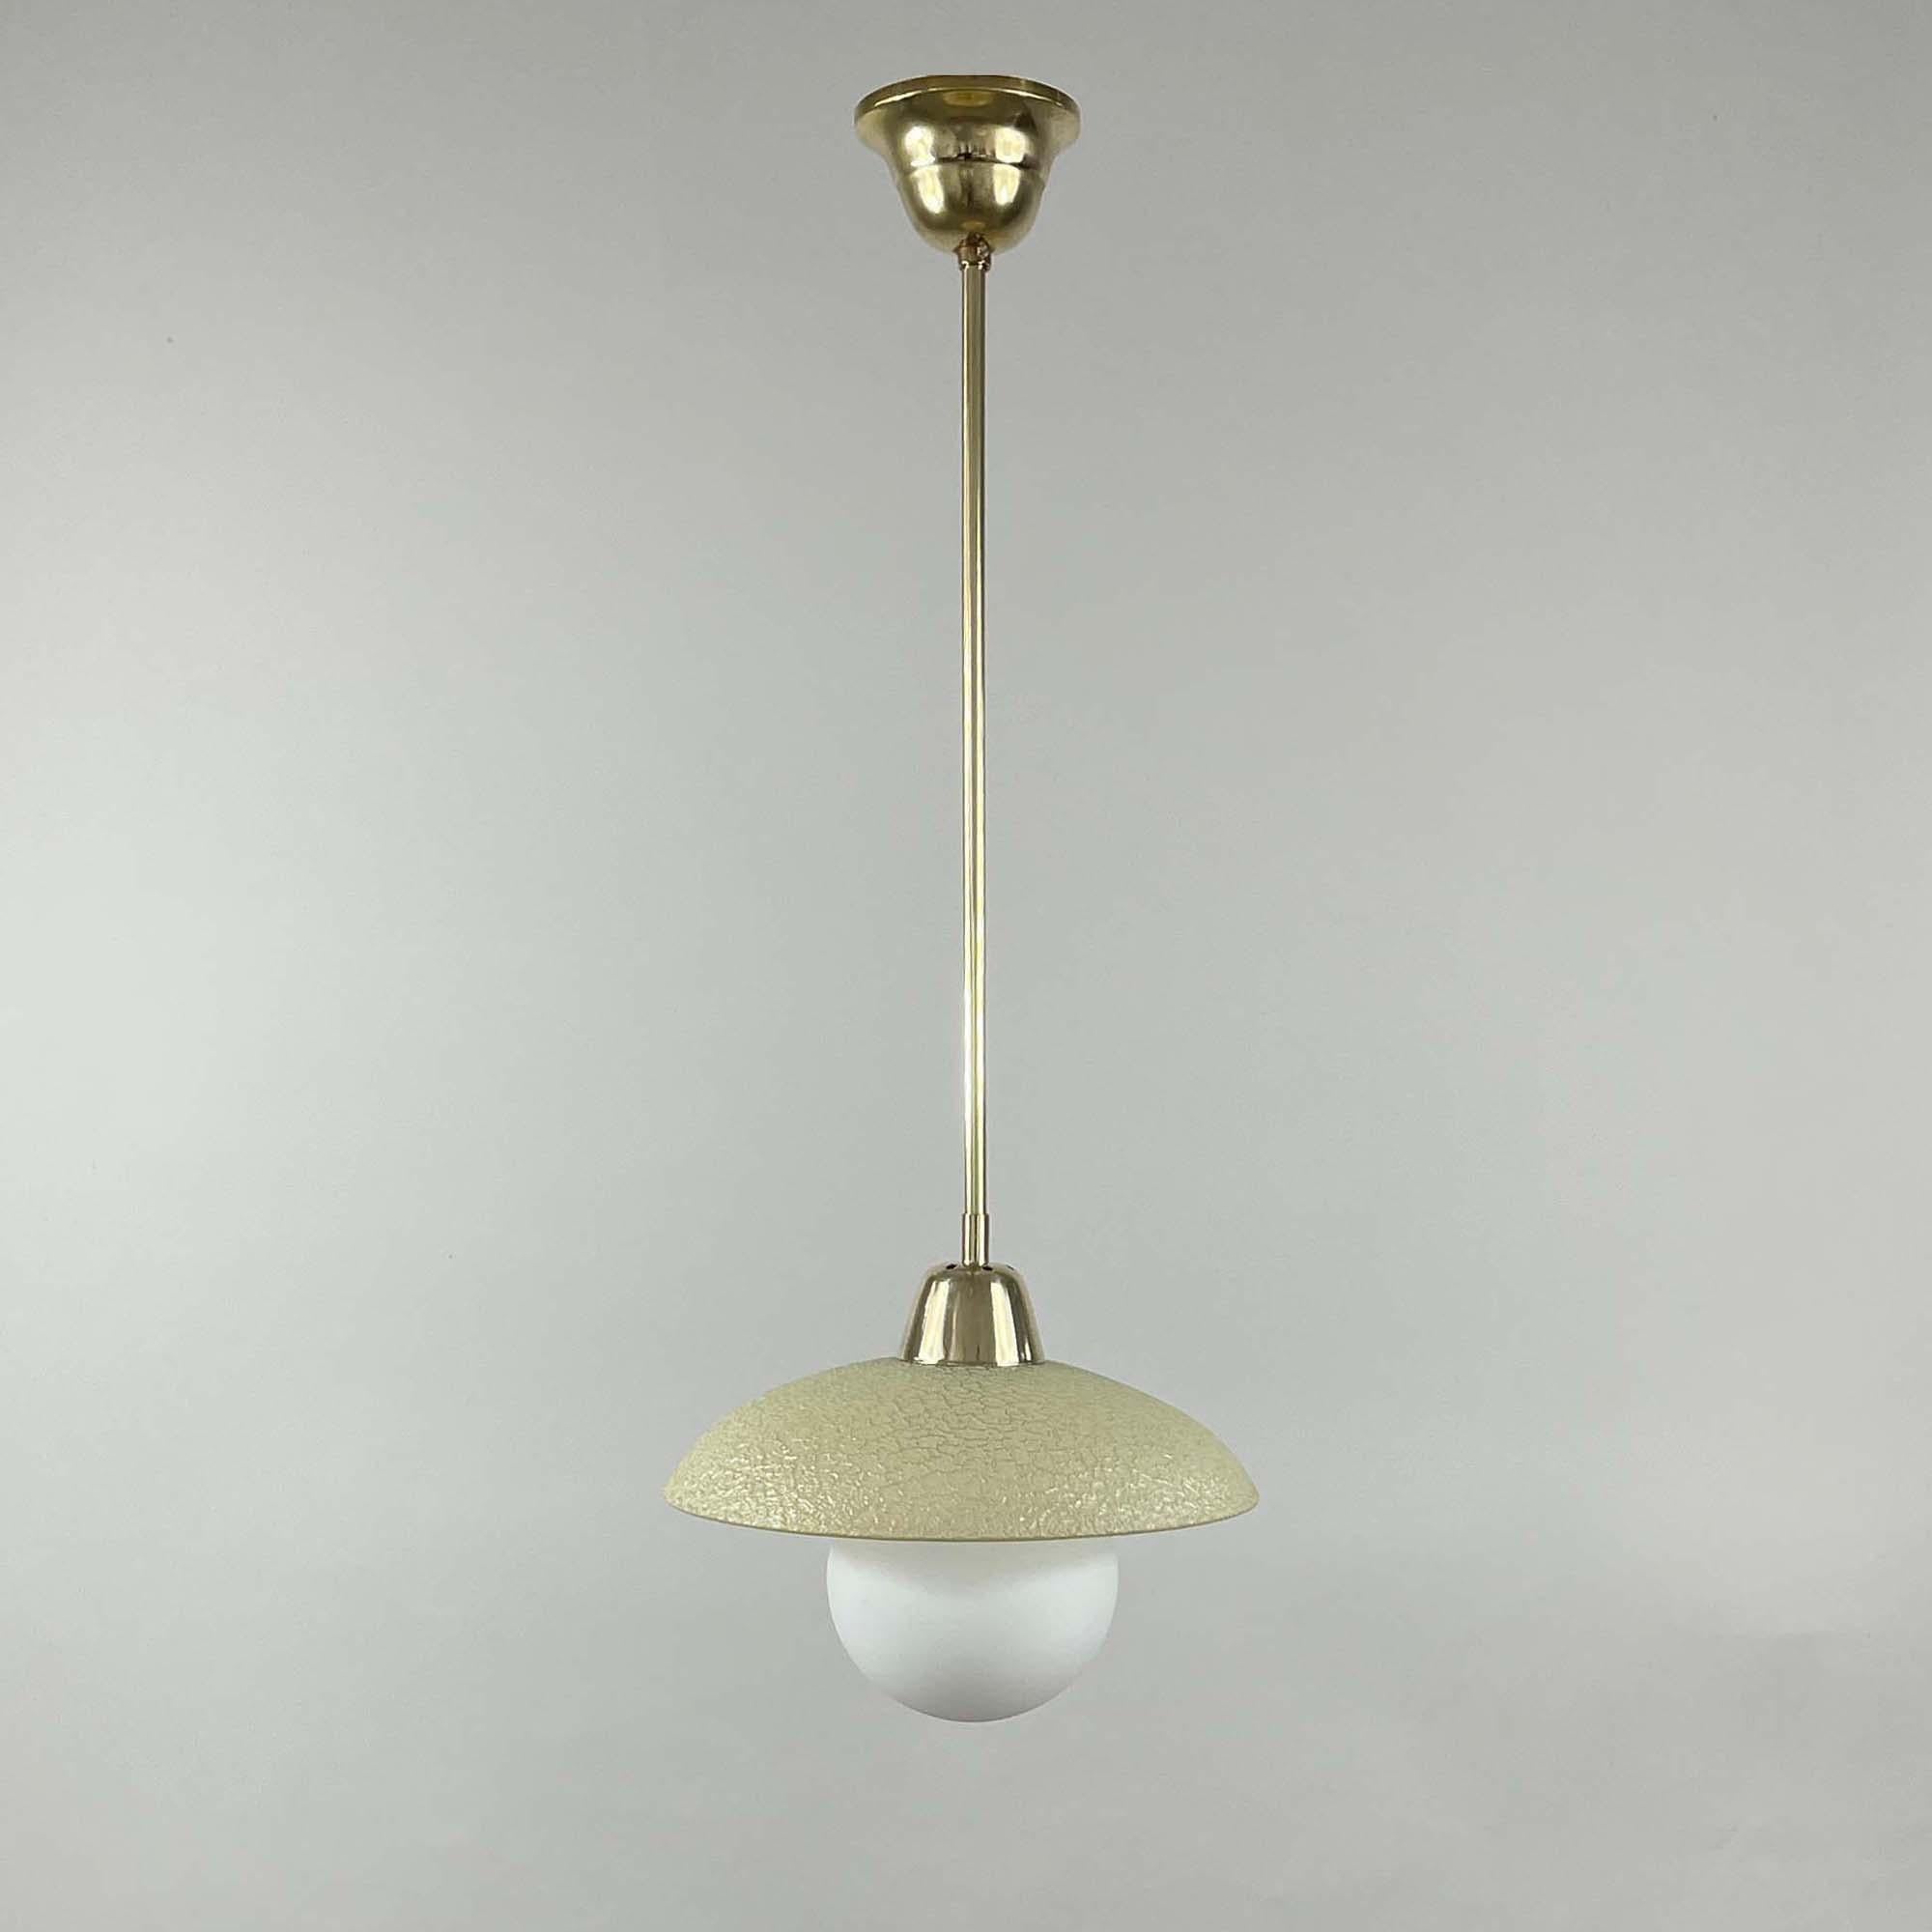 Swedish Cream Textured Glass and Brass Pendants, Sweden 1940s to 1950s For Sale